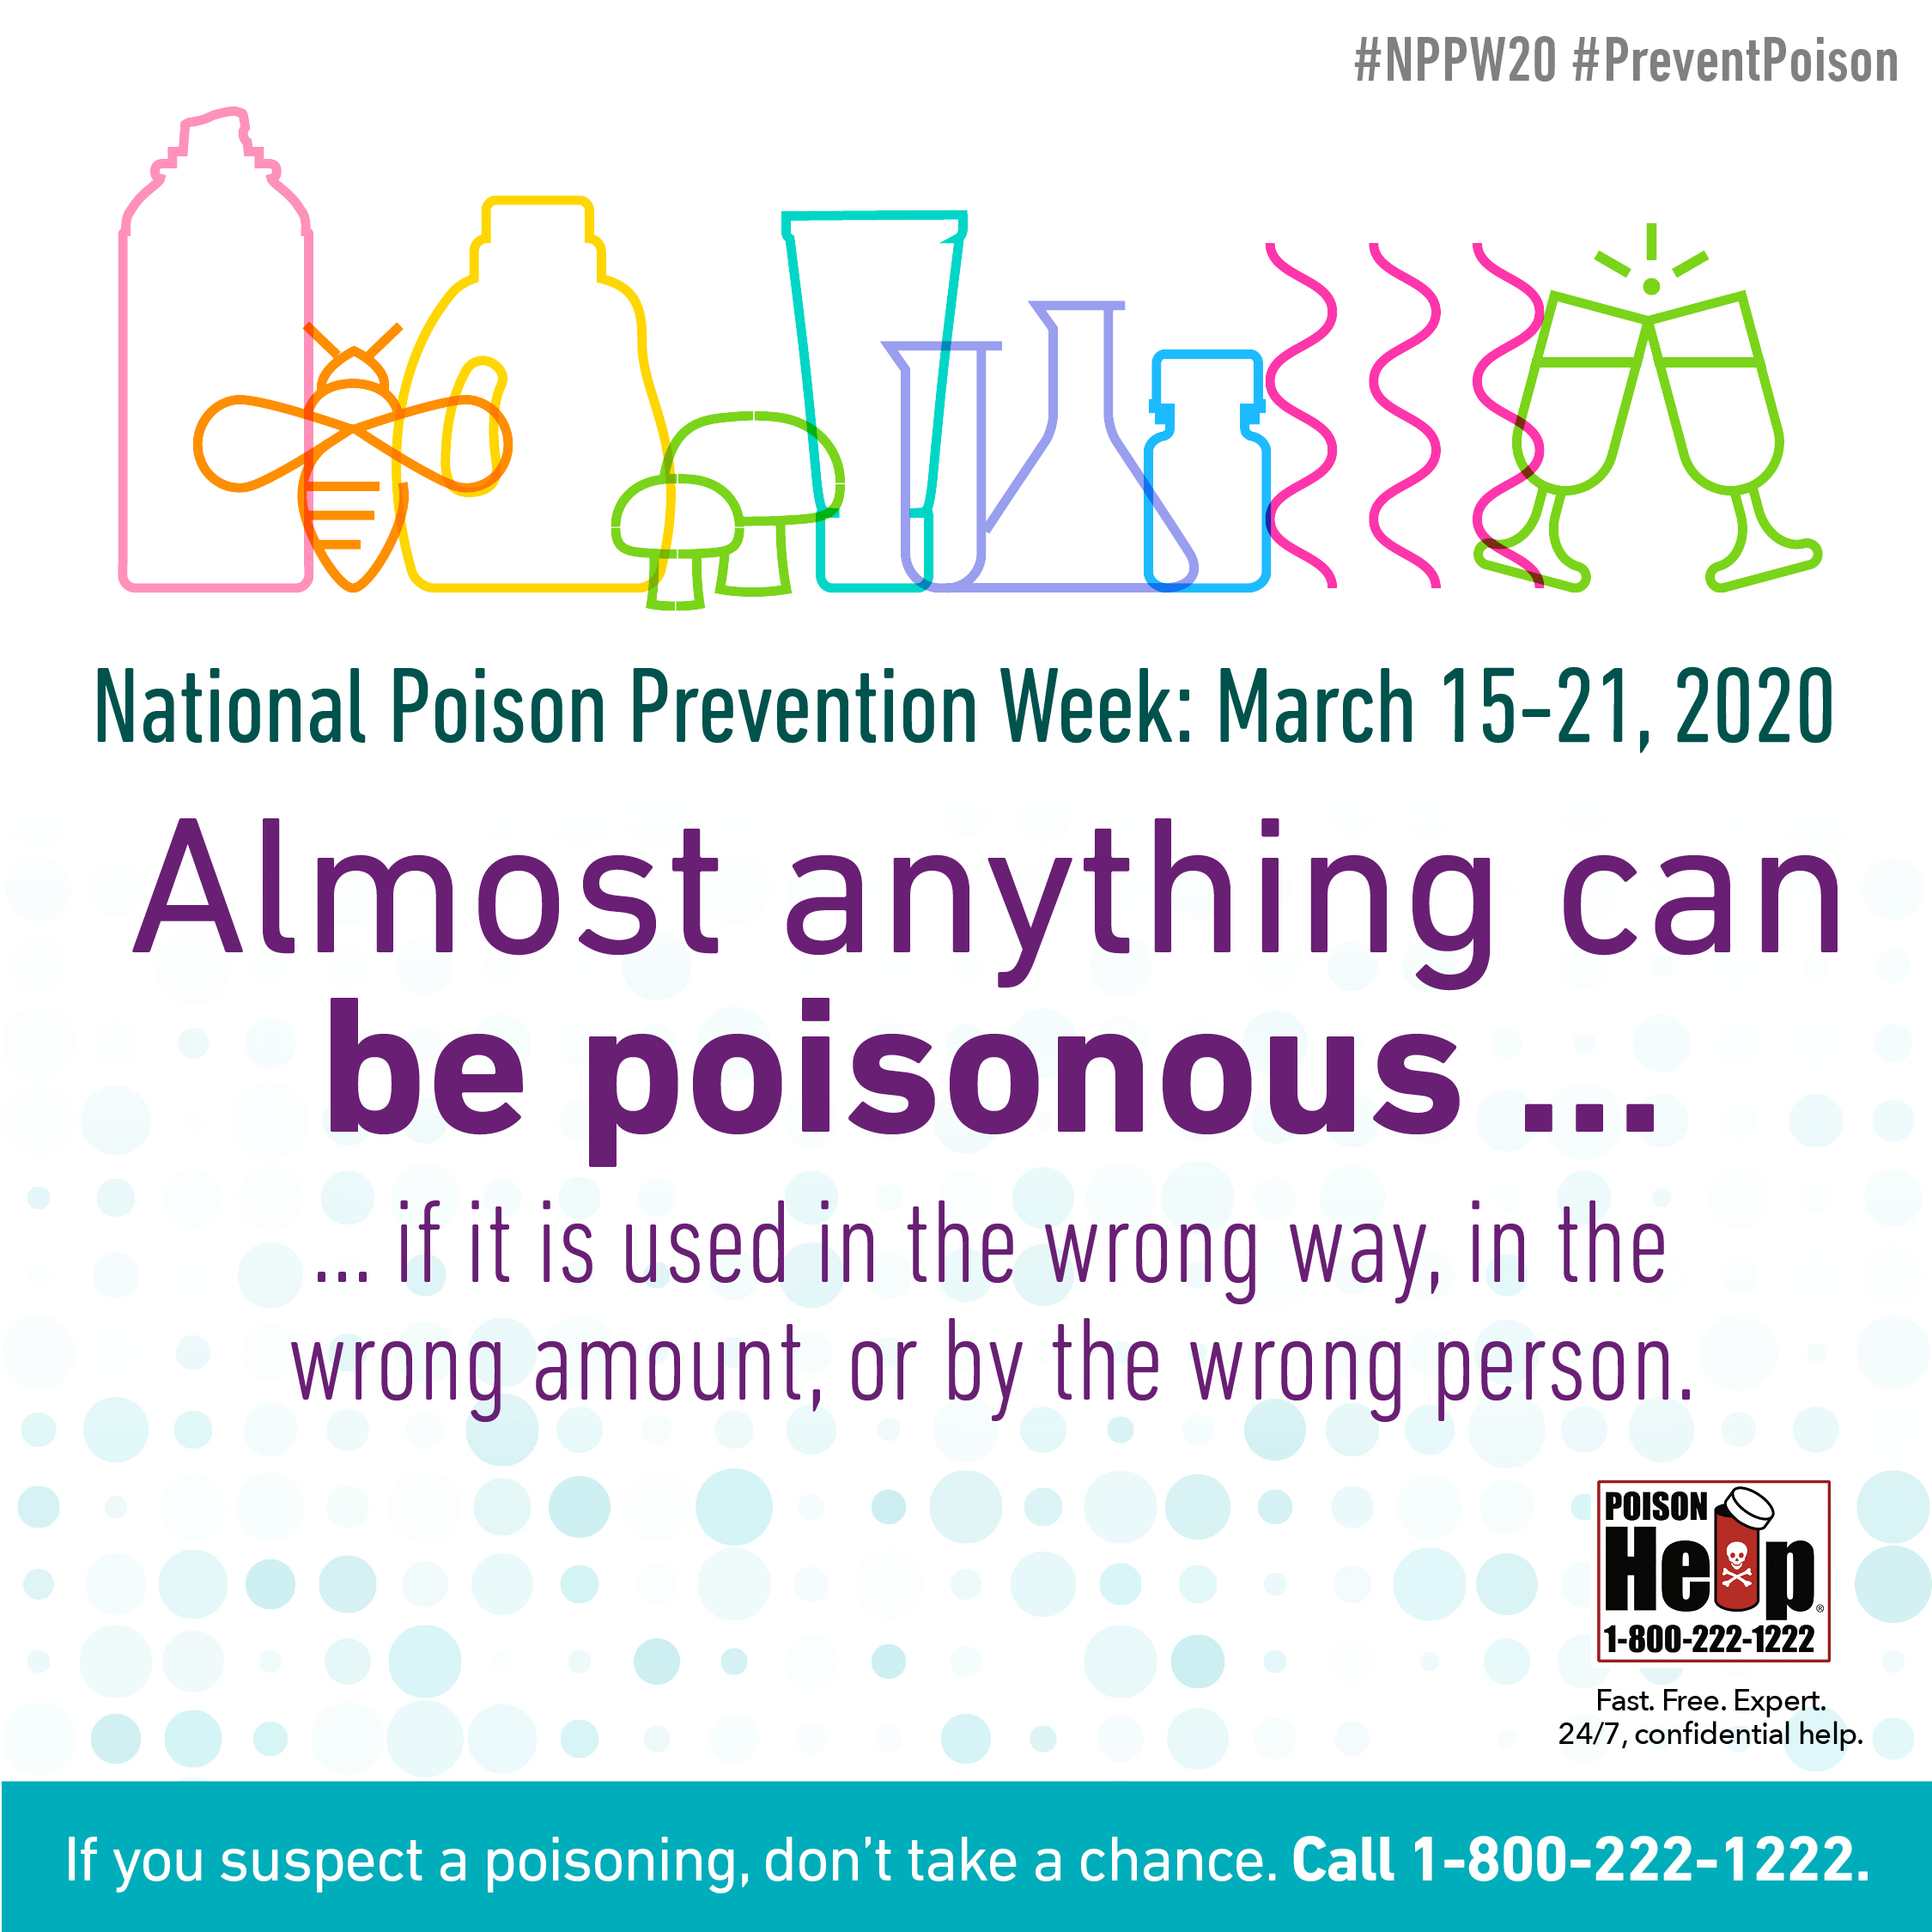 National Poison Prevention Week March 15-21, 2020